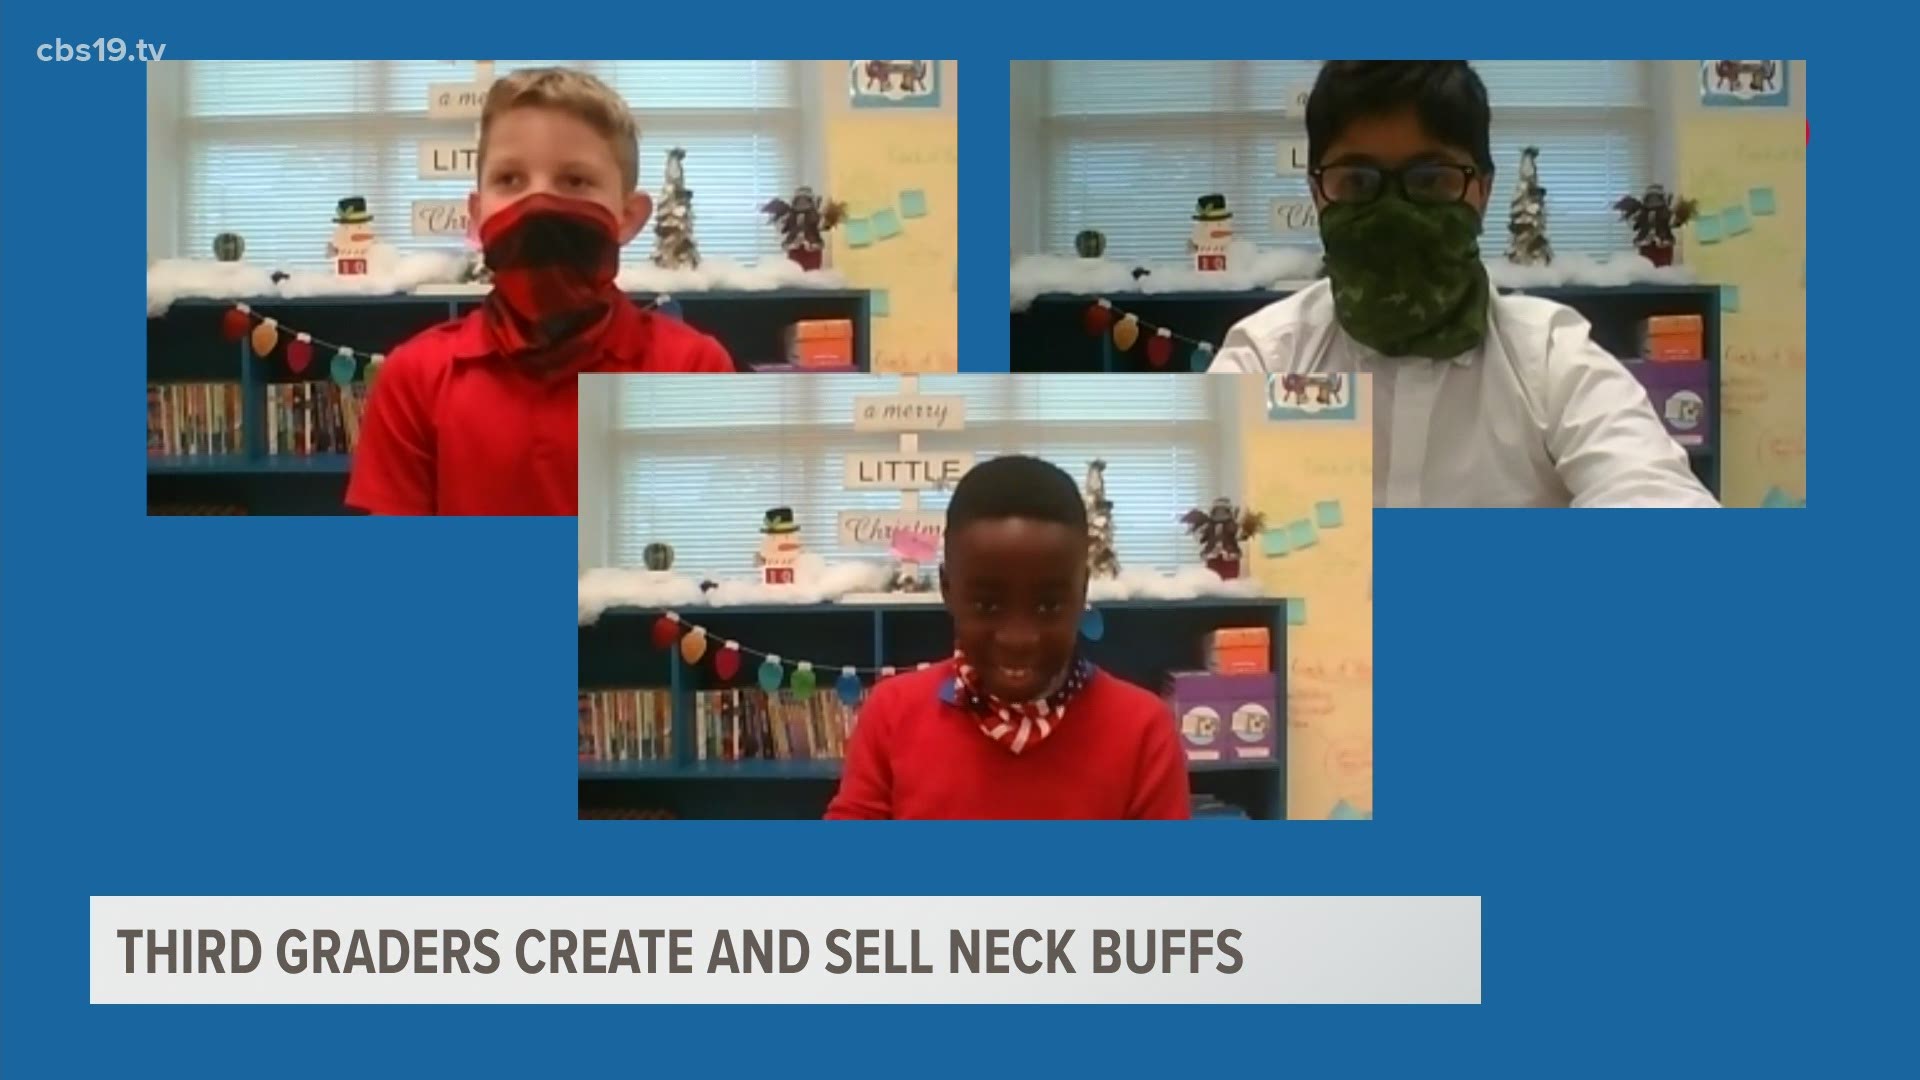 Students at Hudson PEP Elementary in Longview run their business selling neck buffs online.